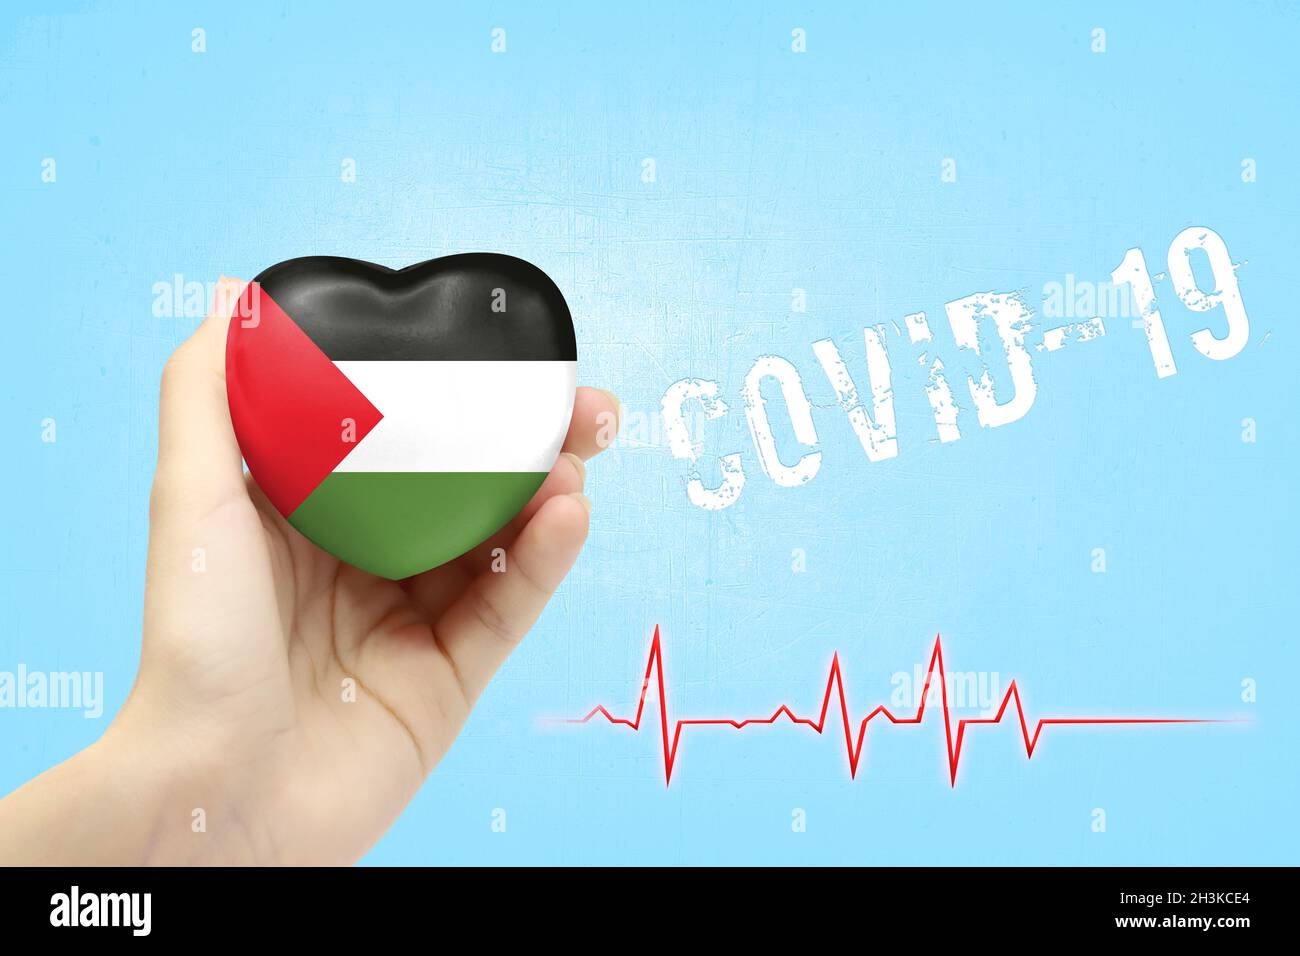 A girl is holding a toy in the shape of a heart with the flag of Palestine, a concept of health care during the covid-19 coronavirus pandemic Stock Photo